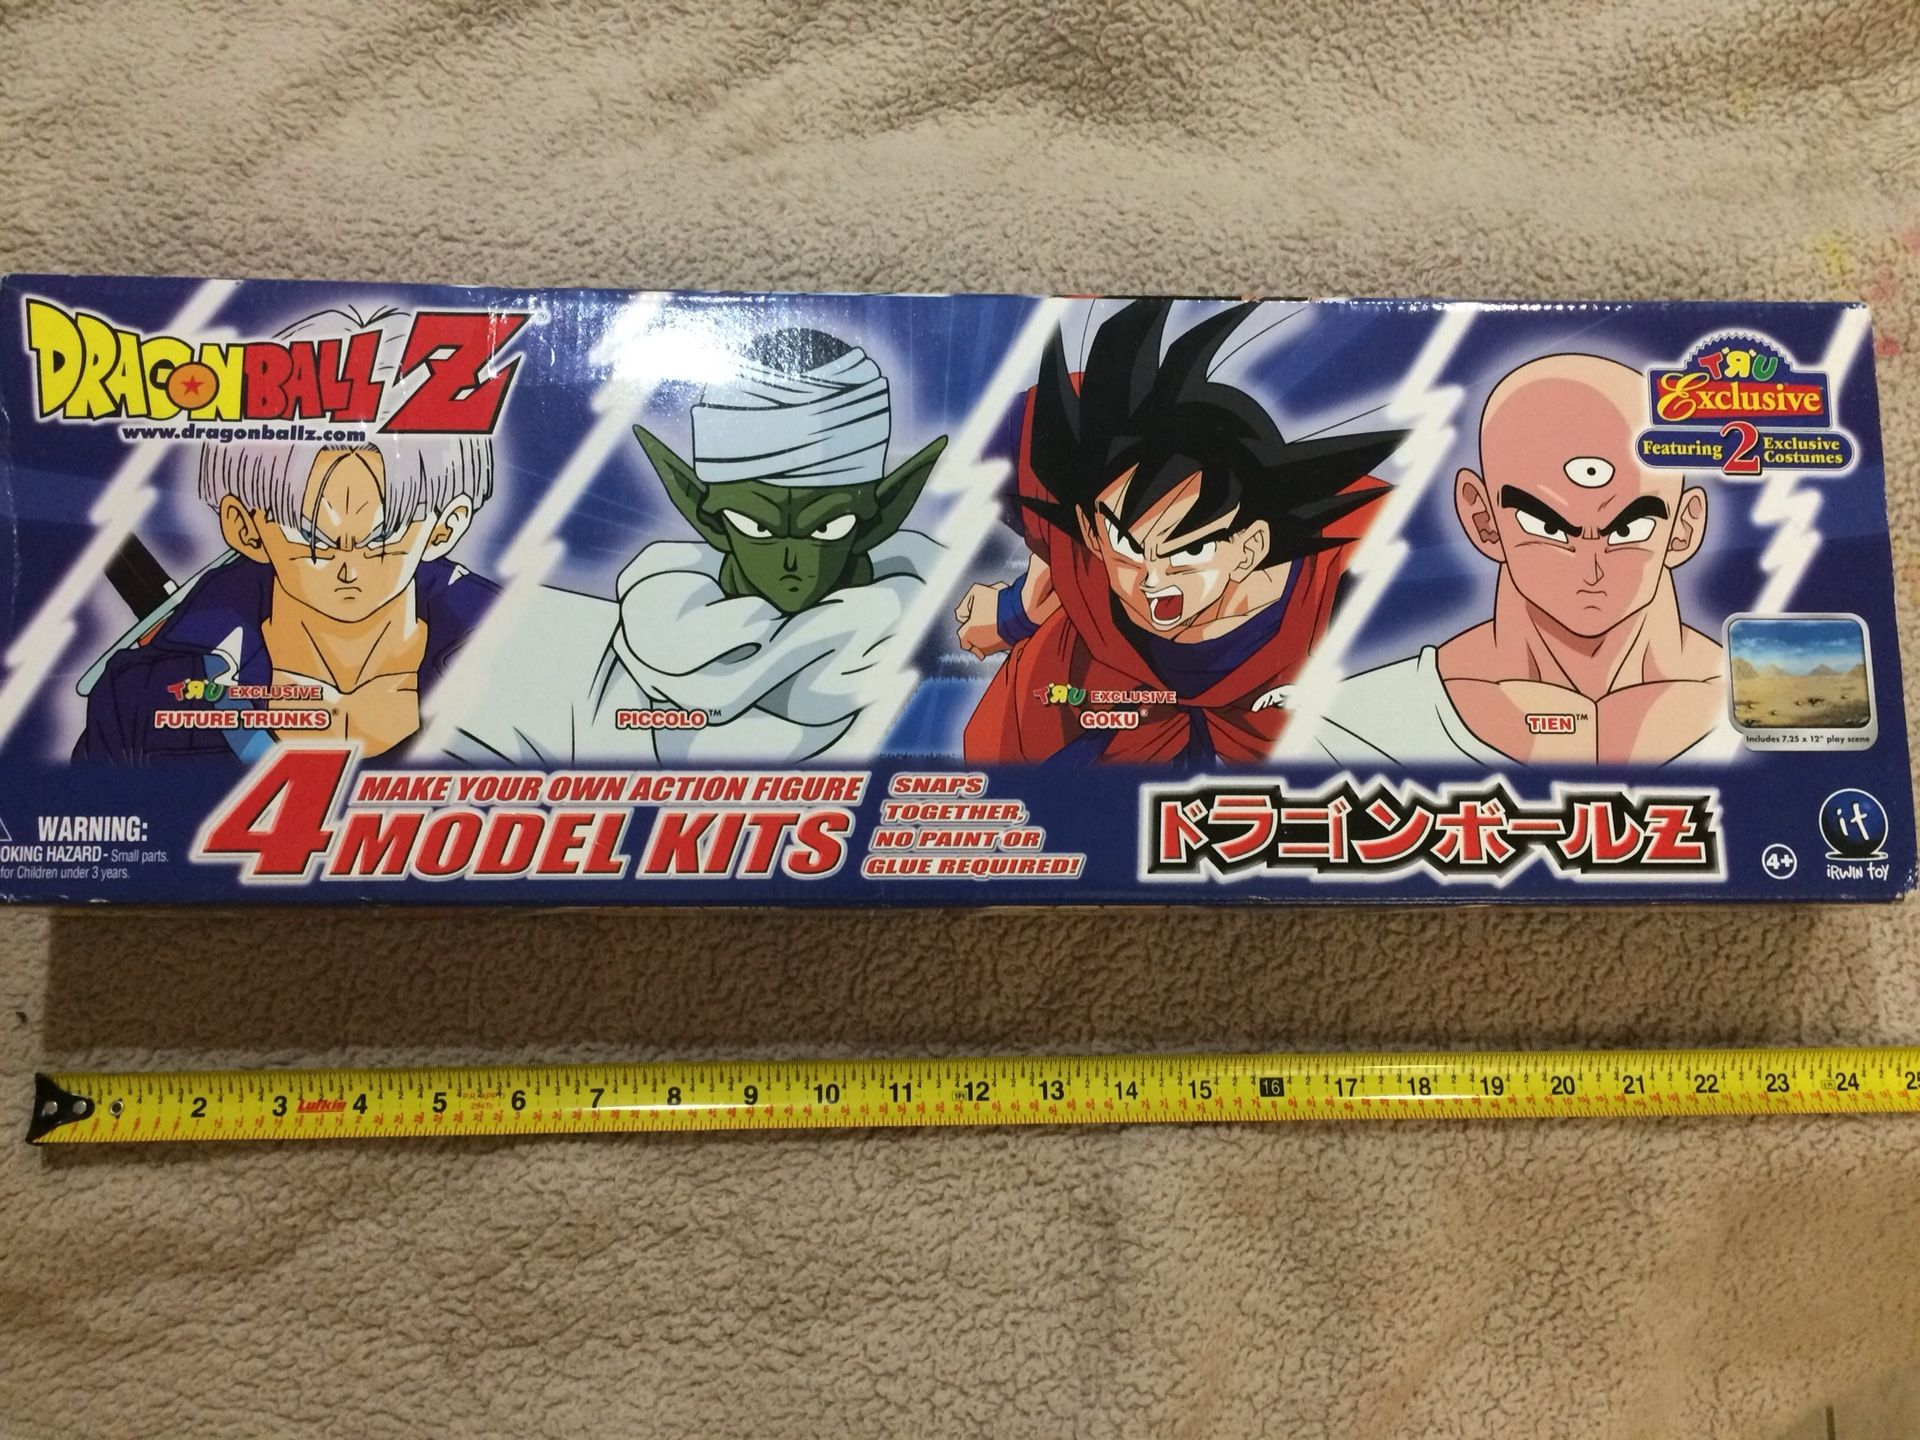 Super Rare Unopened year 2000 Dragonball Z 4 pack of model kits by Irwin Toys